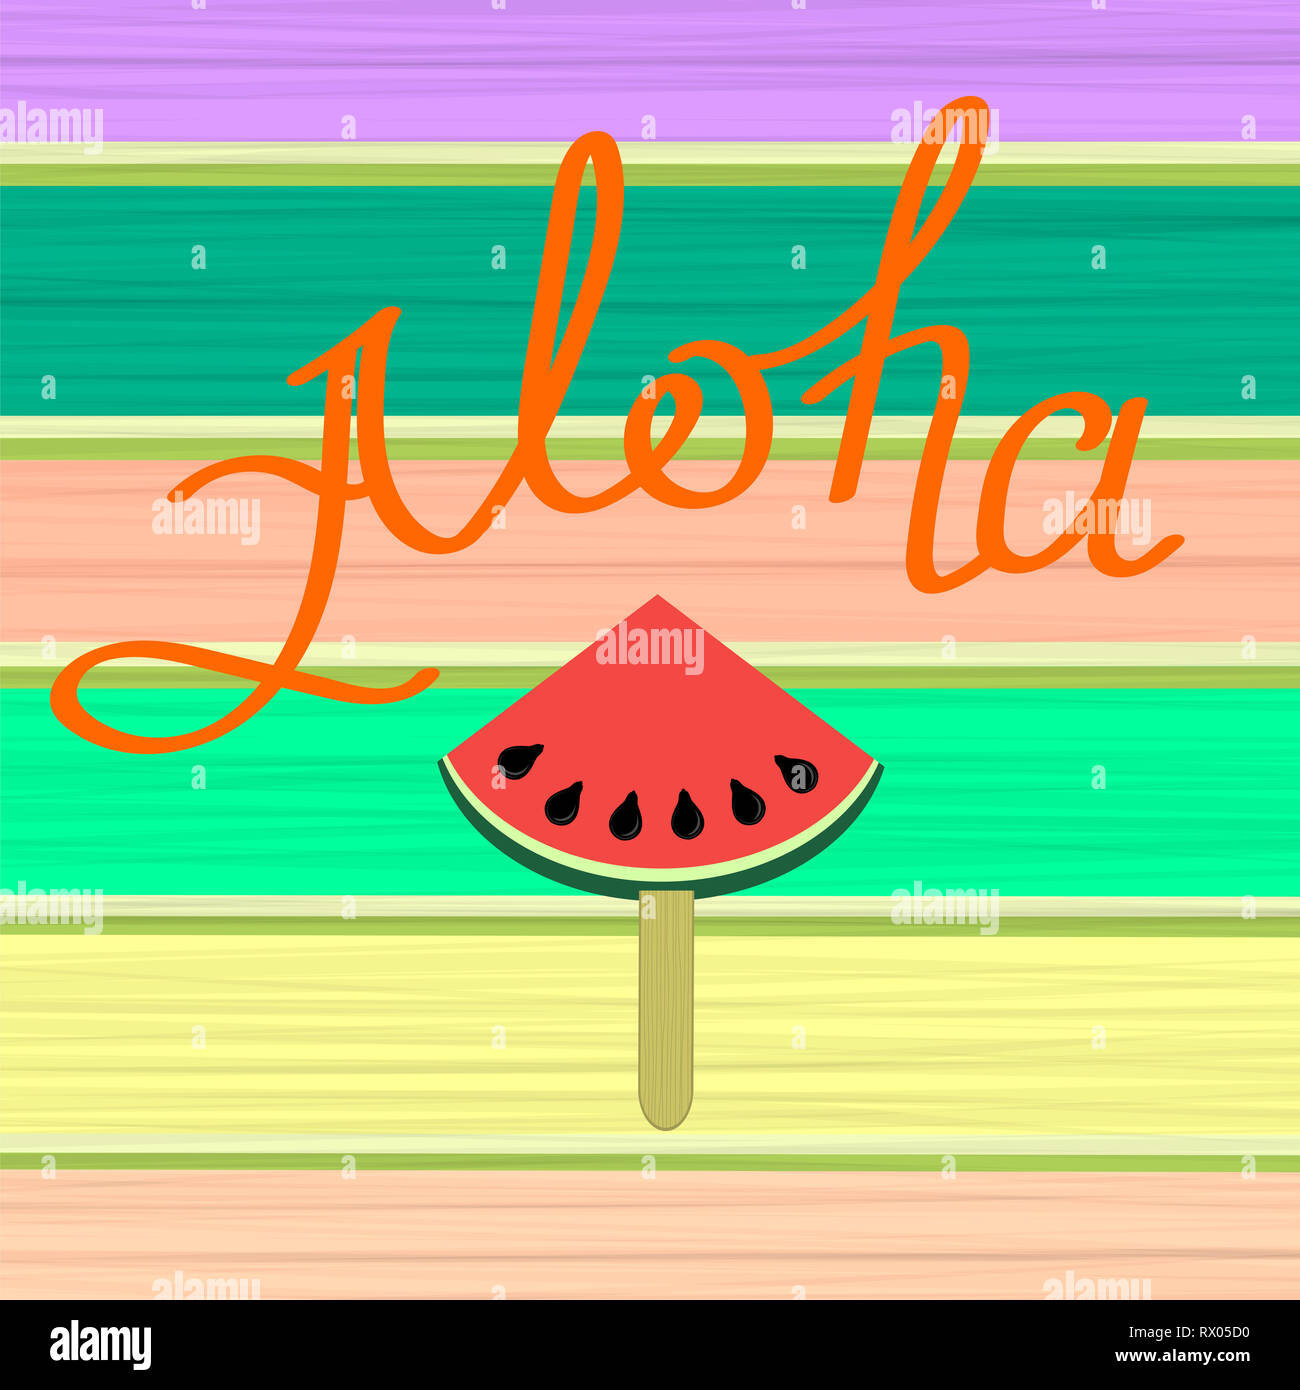 Lettering Vacation Text with Part of Watermelon on Colorful Wooden Planks. Hand Sketched Aloha Typography Sign Stock Photo